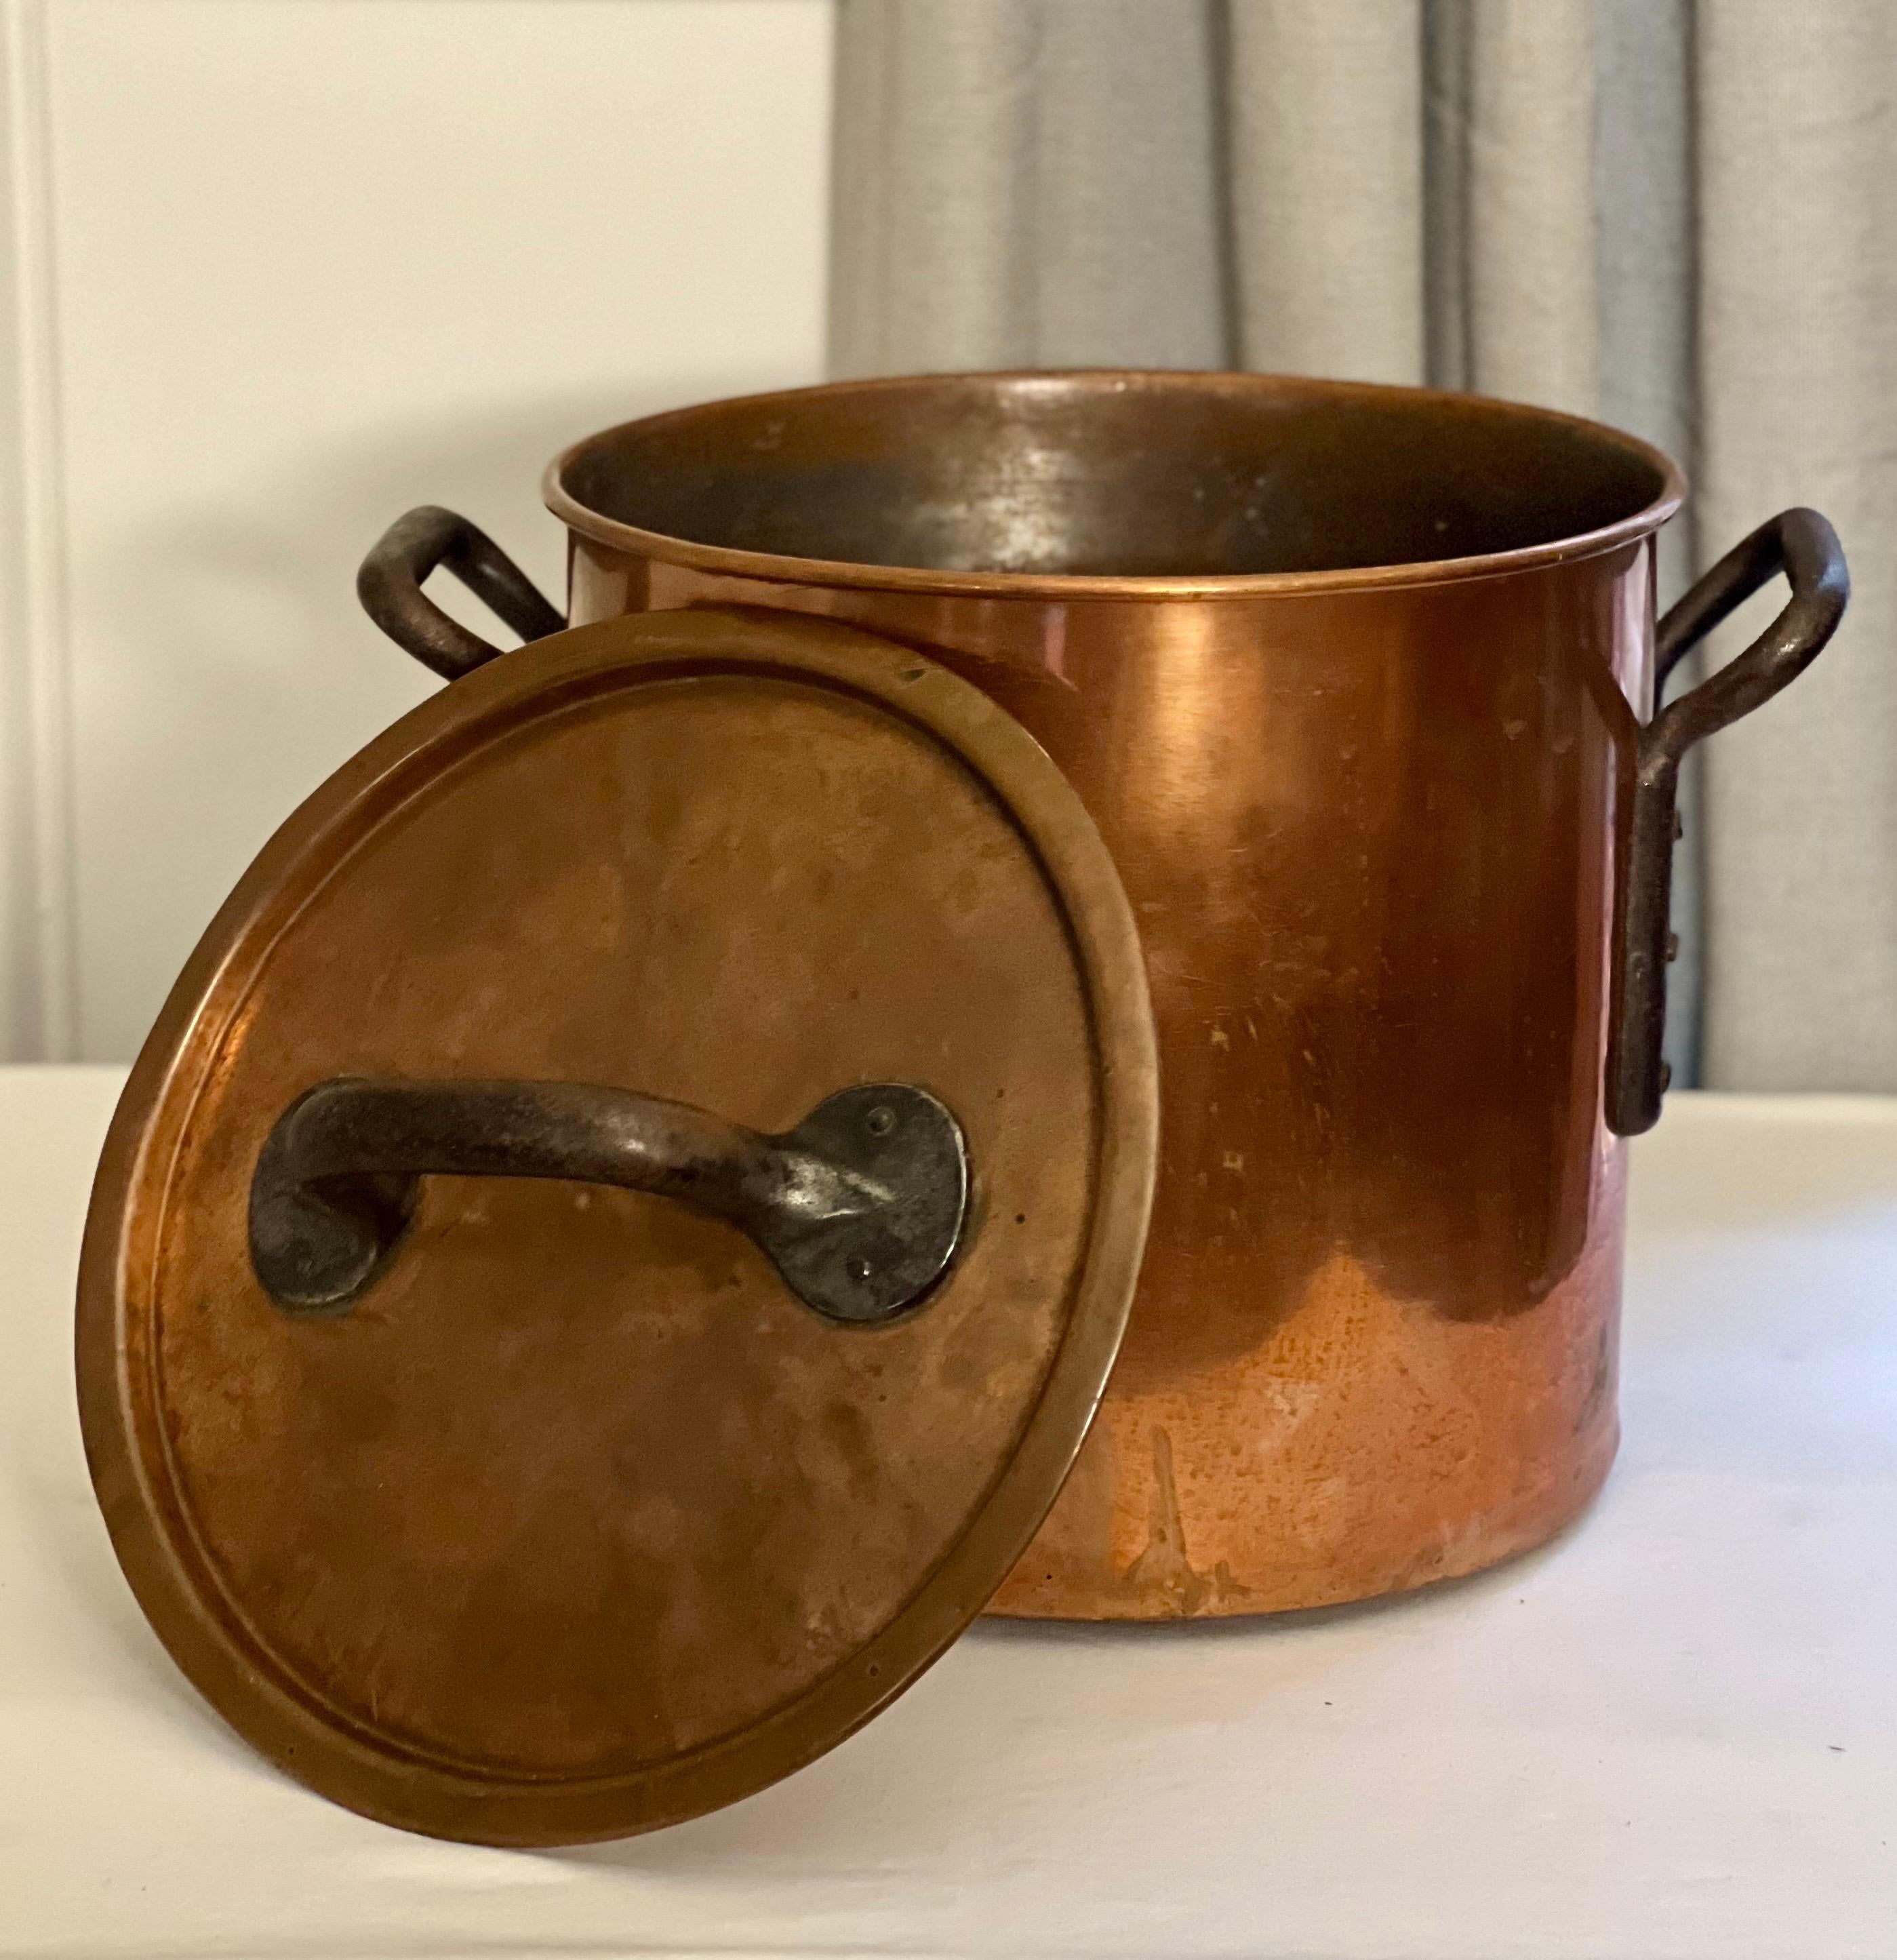 Large copper pot, log holder, ice bucket or jardiniere, early 20th century.

Wonderful, super sturdy pot with chunky iron handles and fitted lid. This is a versatile and handsome vessel that would be a fantastic addition to your home. Great to use